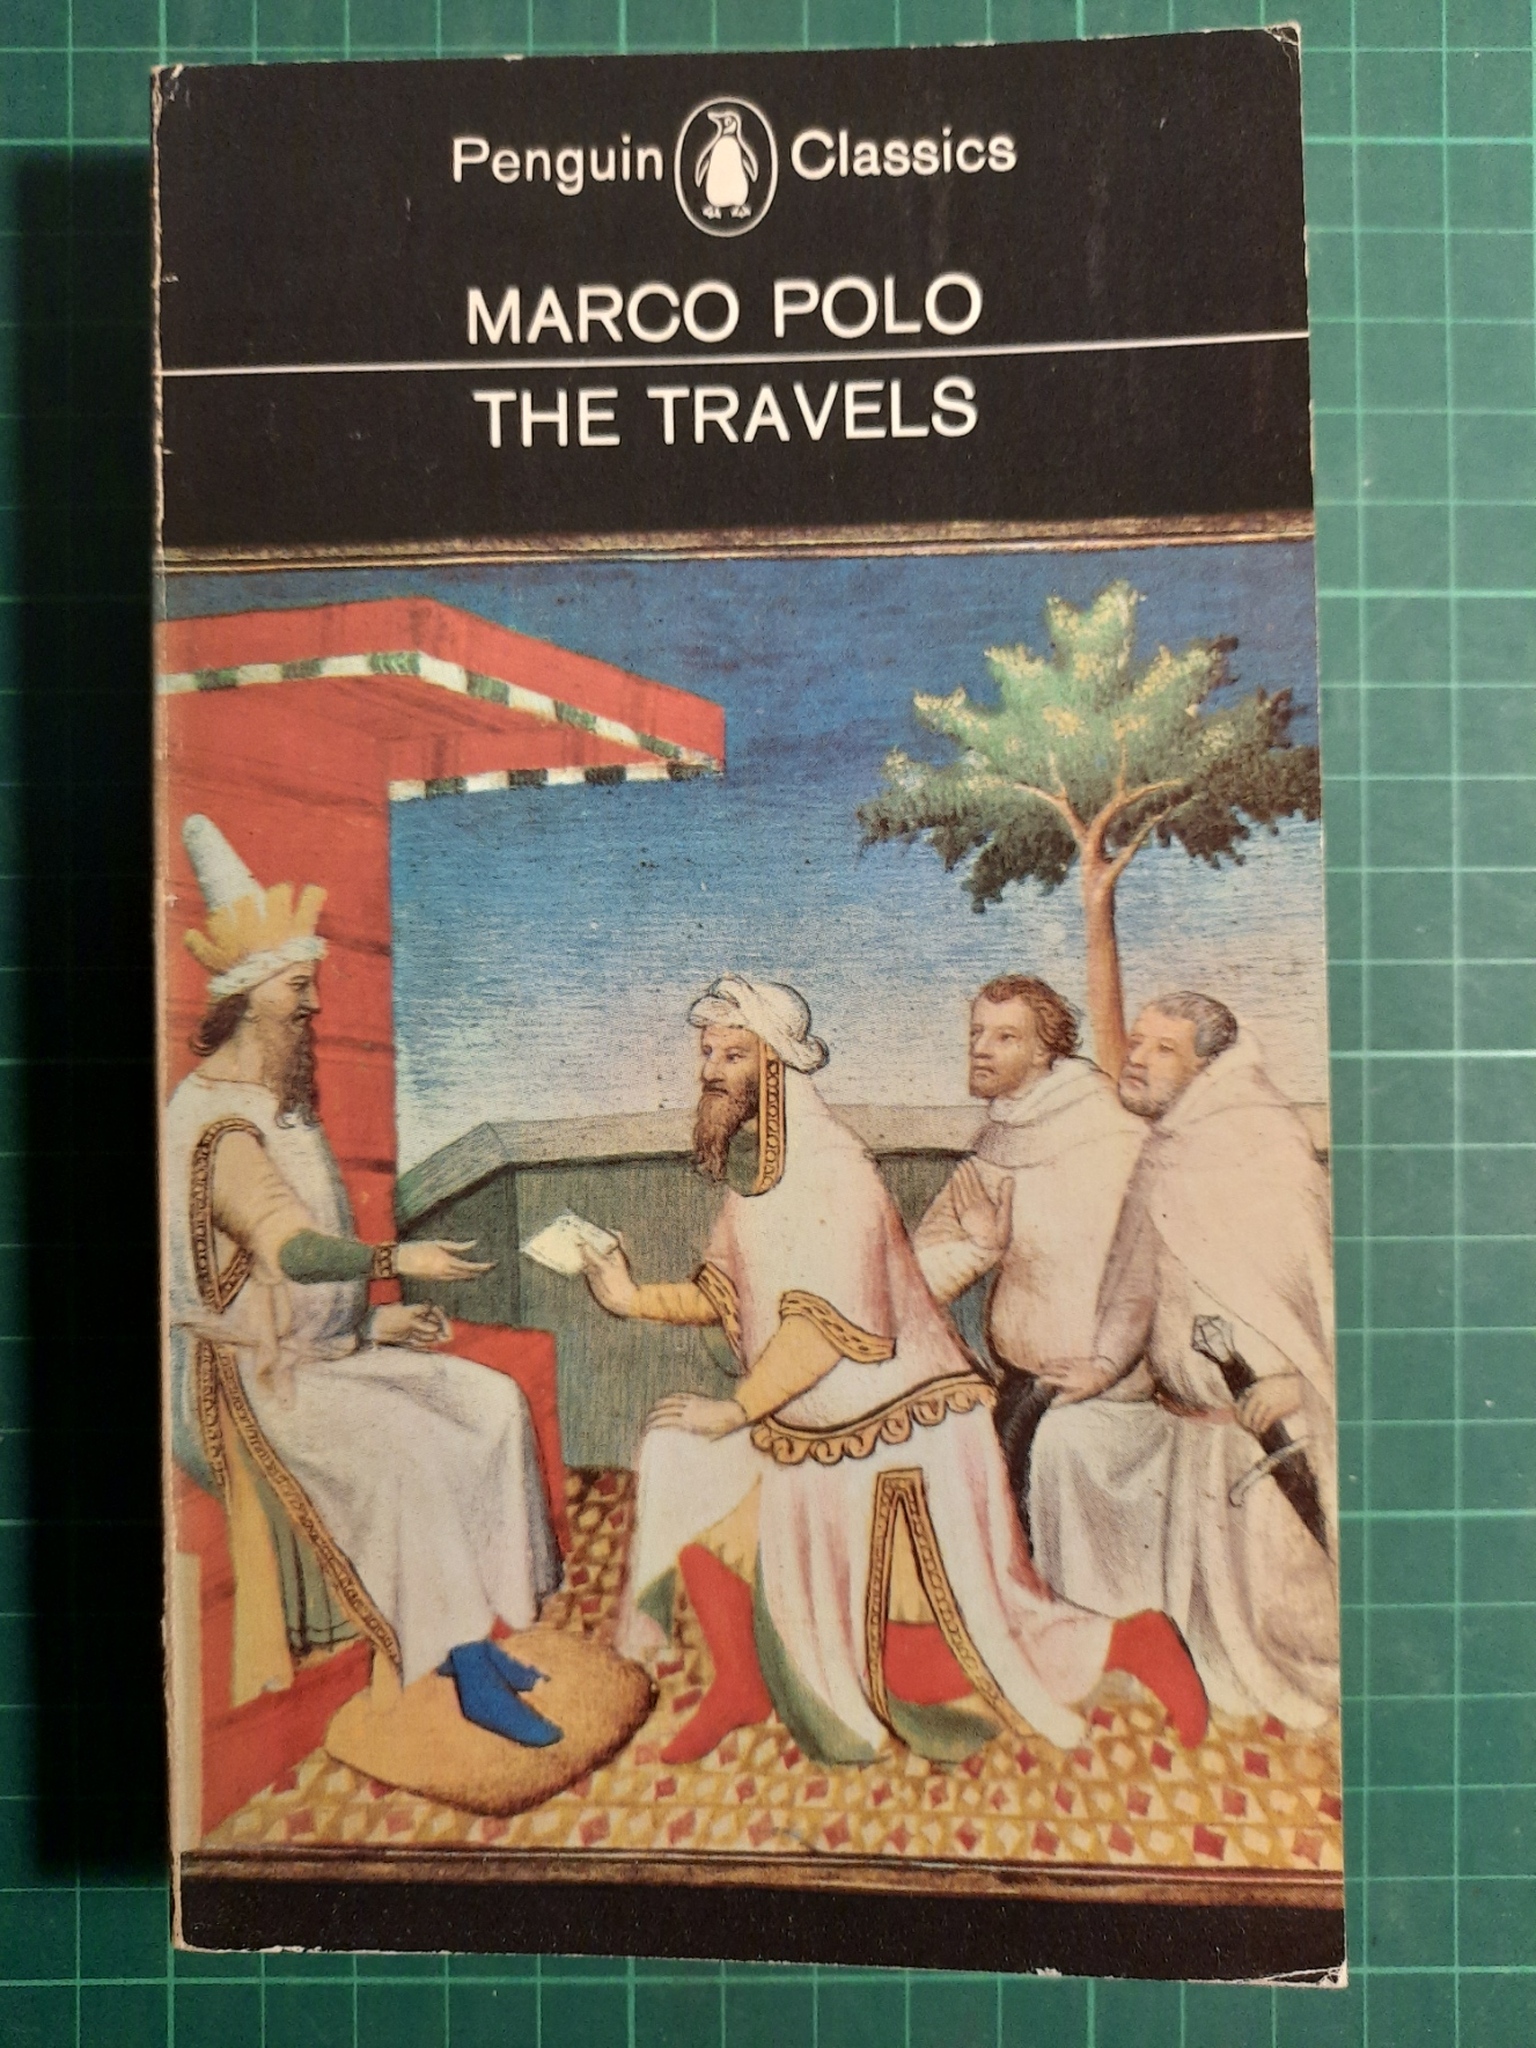 Marco Polo the travels